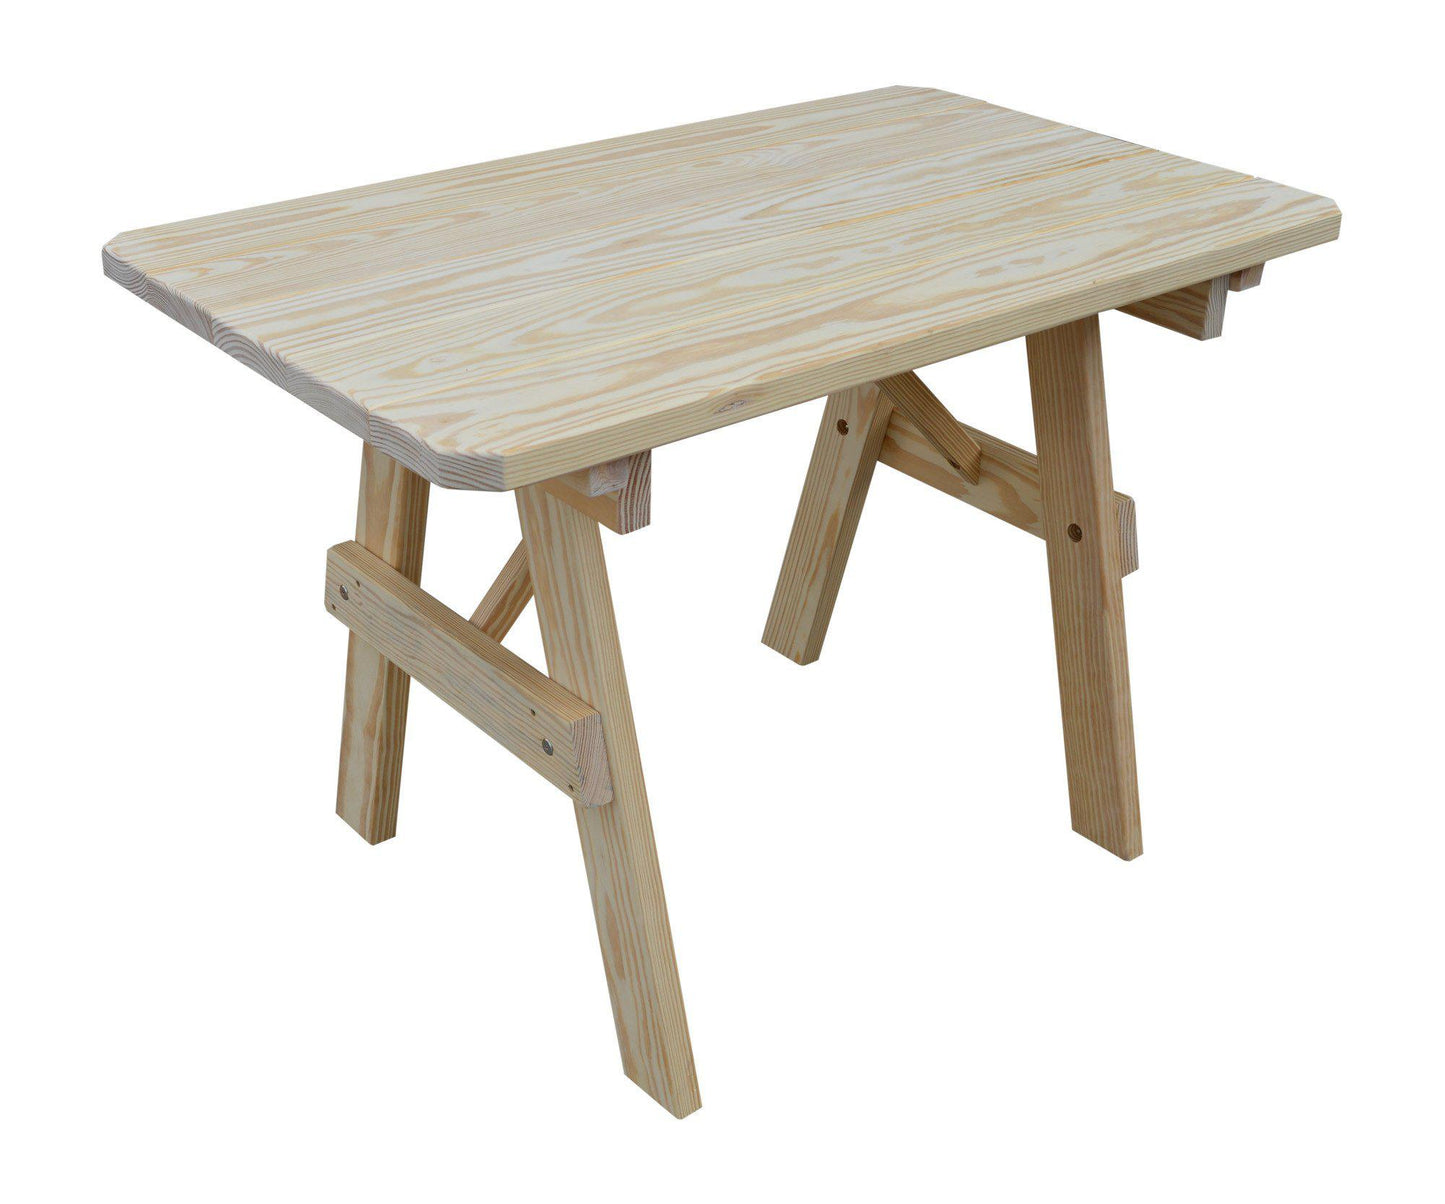 A&L Furniture Co. Pressure Treated Pine 4' Traditional Table Only - LEAD TIME TO SHIP 10 BUSINESS DAYS